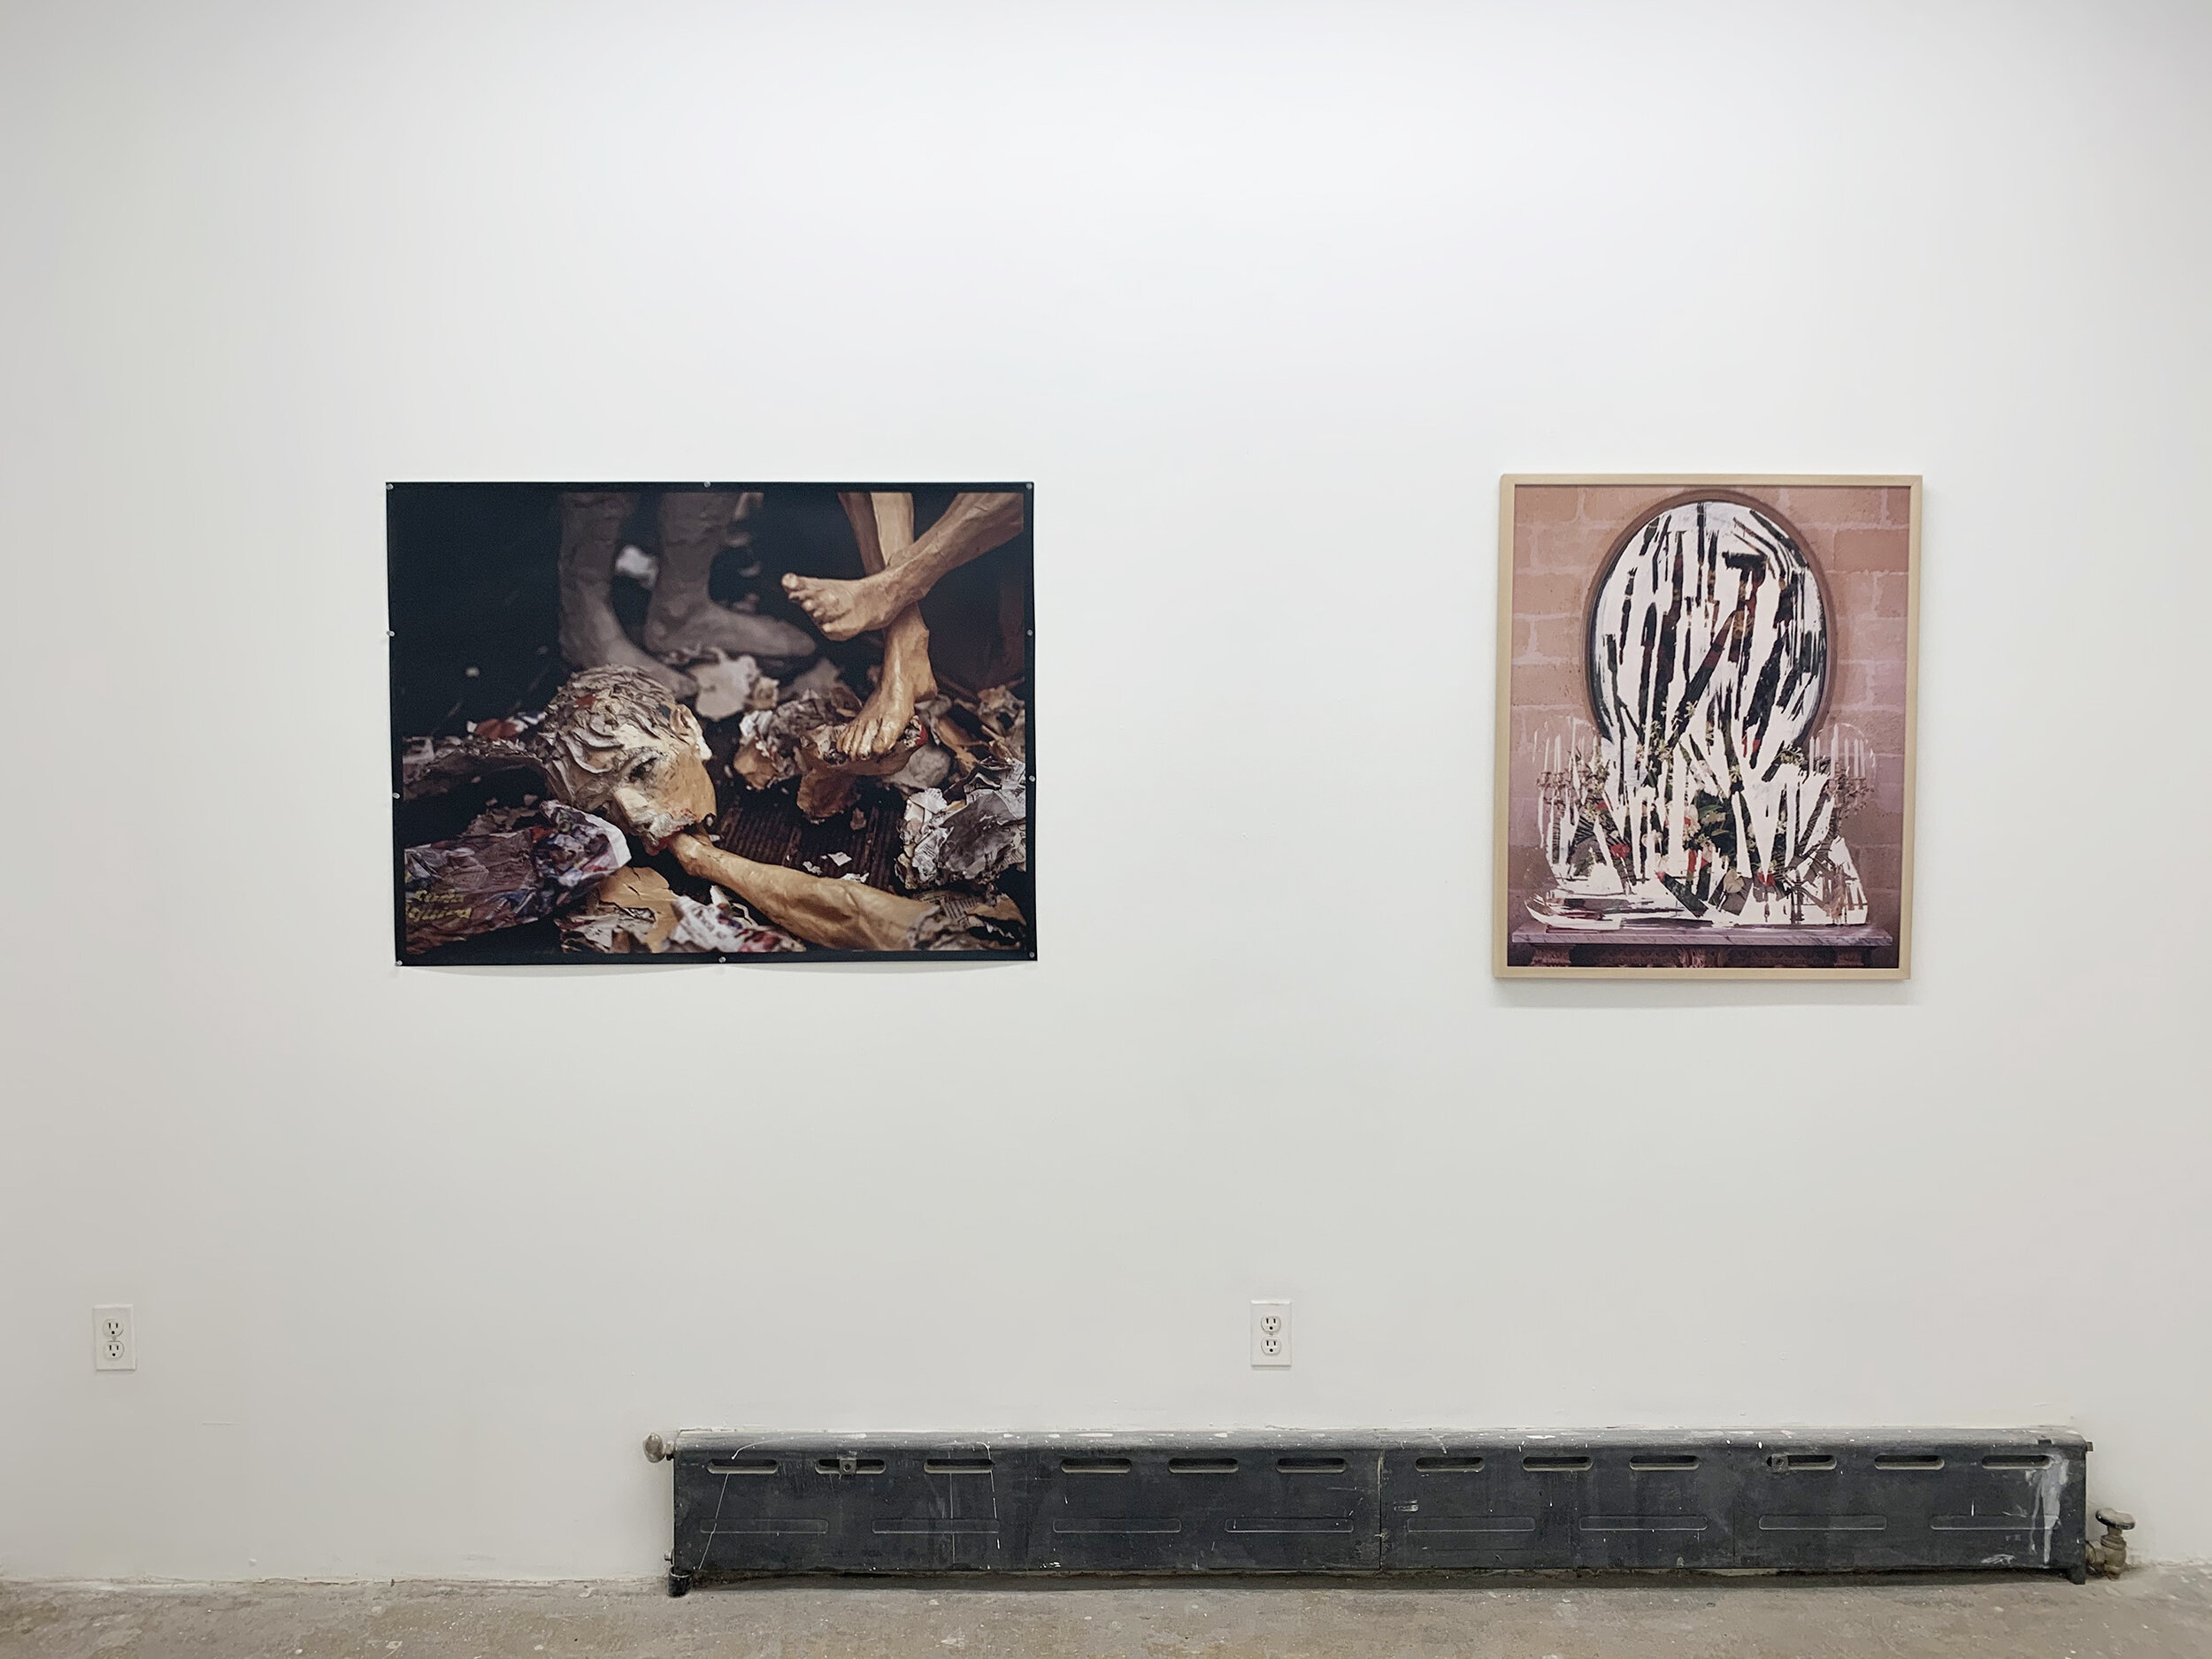 Juan Pablo Langlois Vicuña, Rusty Shackleford,  installation images, None Sing exhibition at Cindy Rucker Gallery